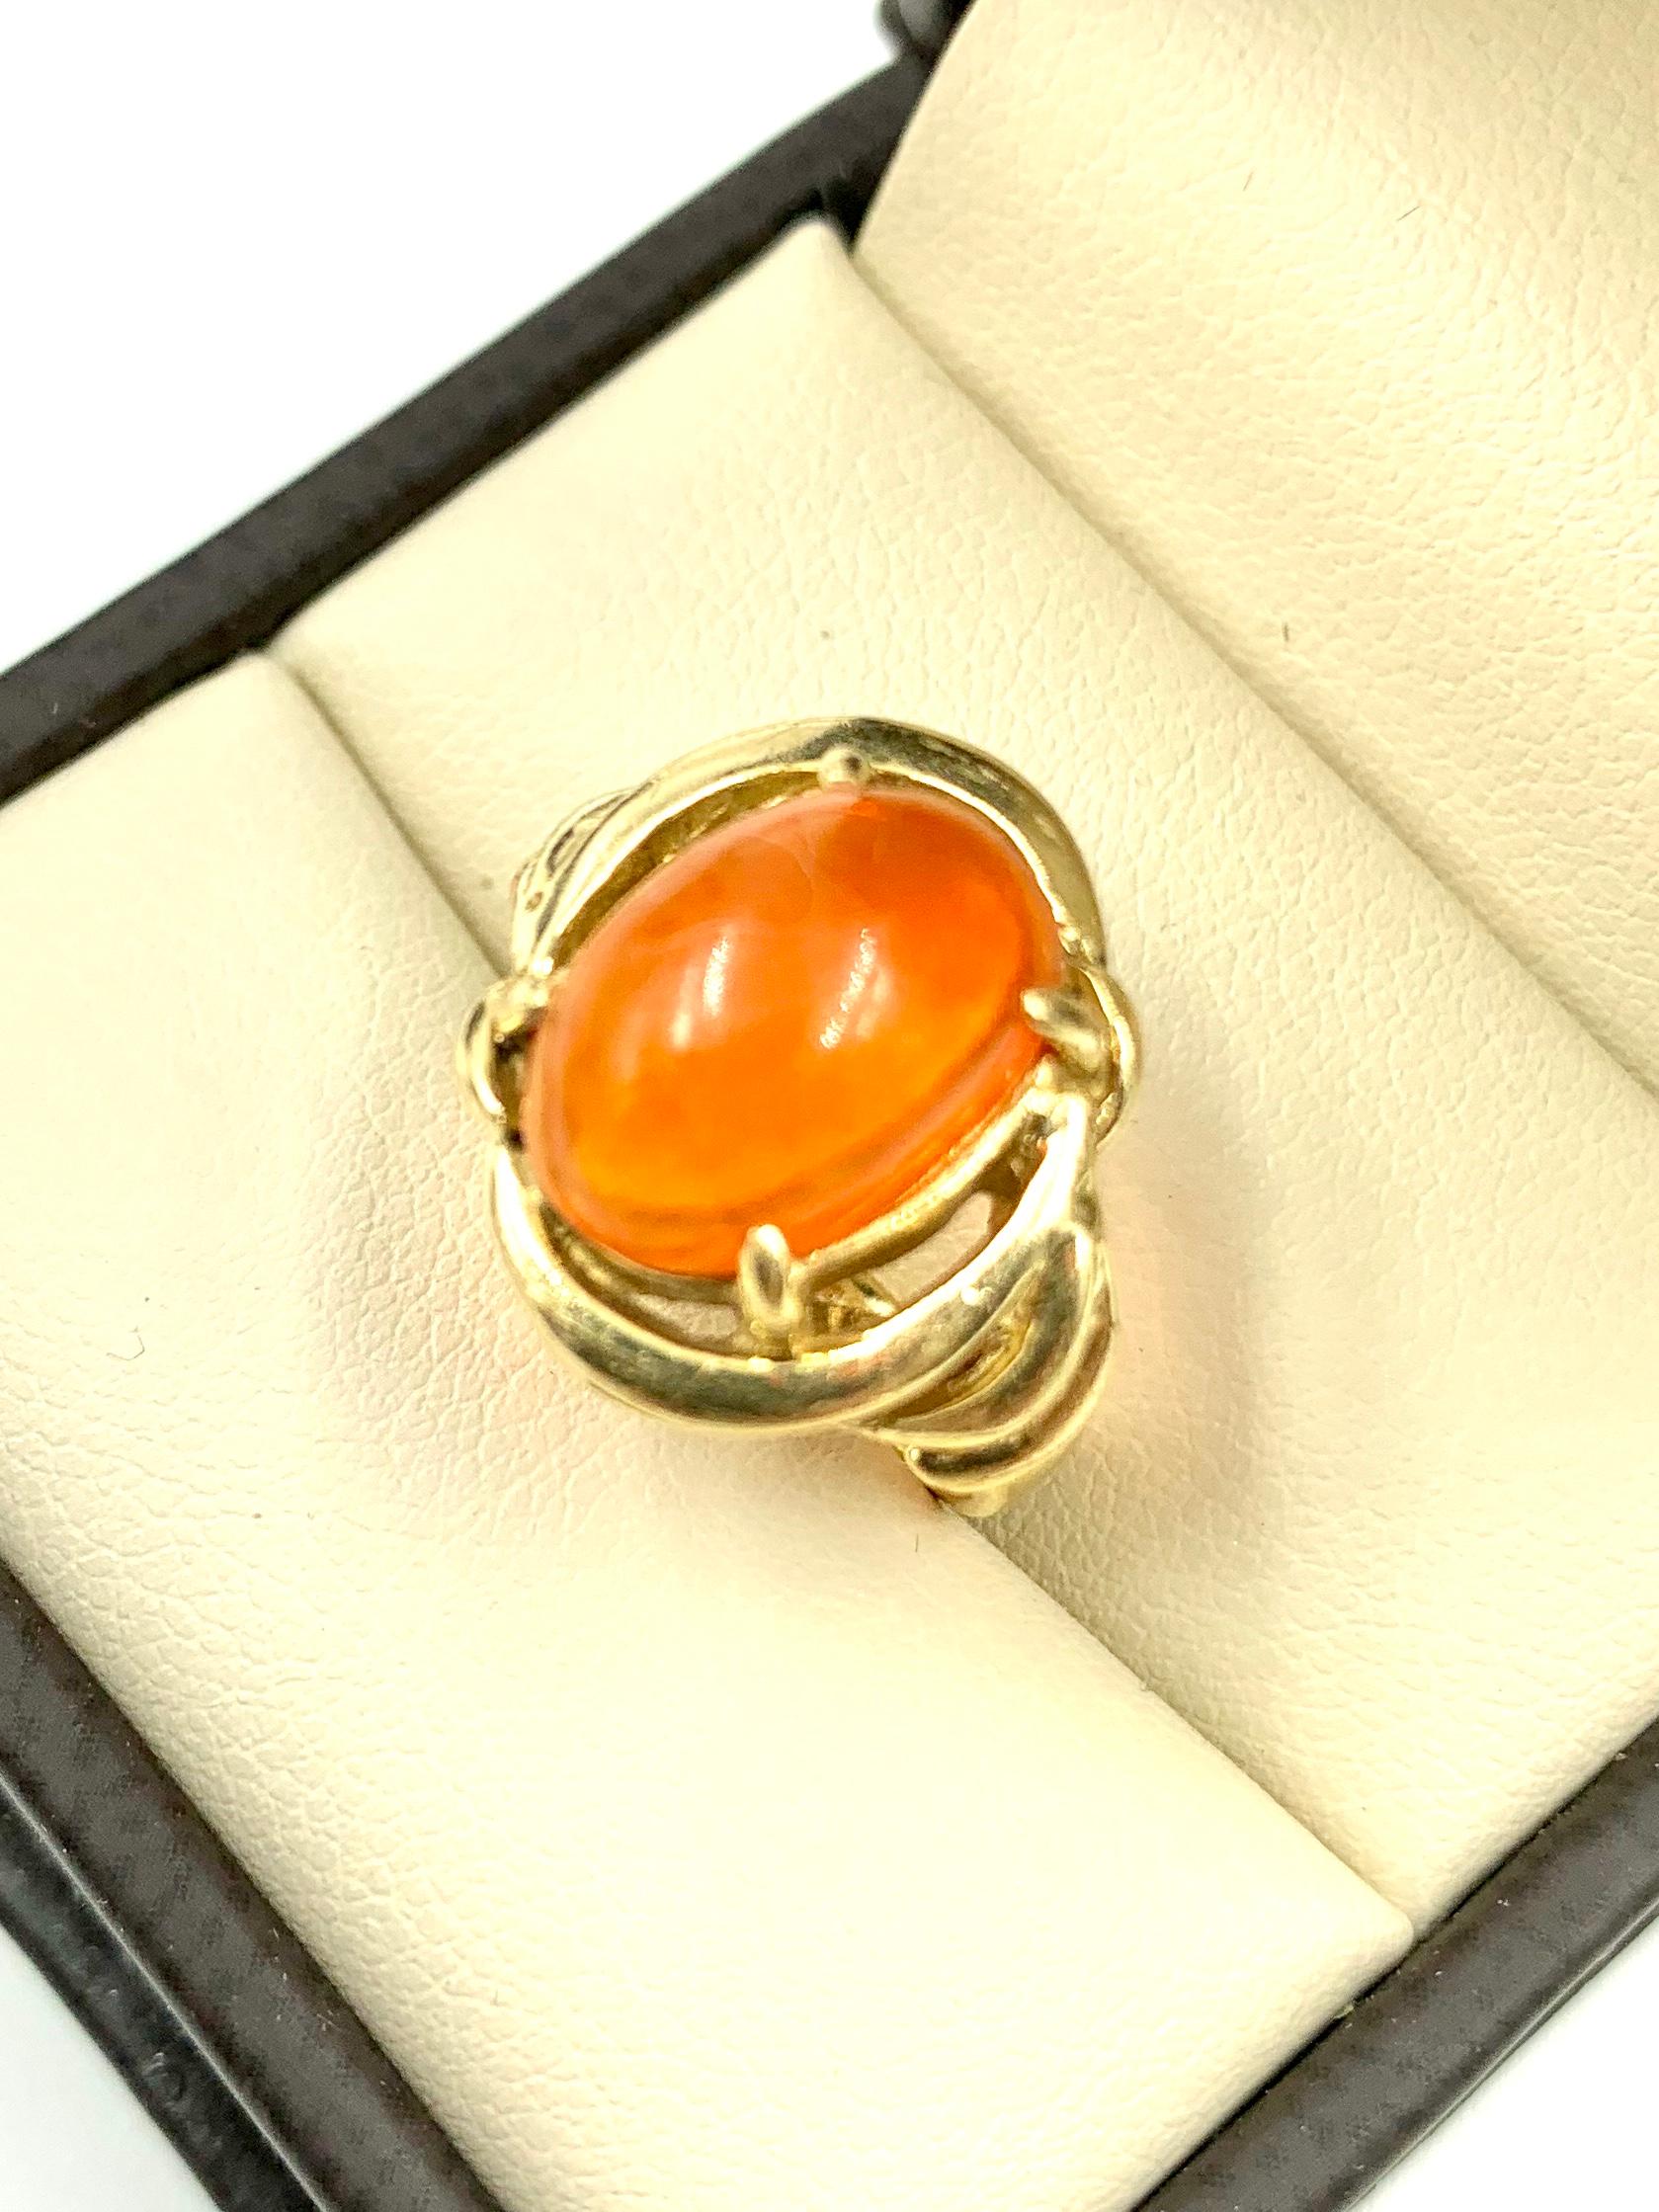 Beautiful vibrant orange oval cabochon fire opal 14K yellow gold ring.
The unusual gold swirl design of this ring complements the natural fiery swirl inclusions of the opal gemstone. 
Opals are among the most fascinating and desirable gemstones. The